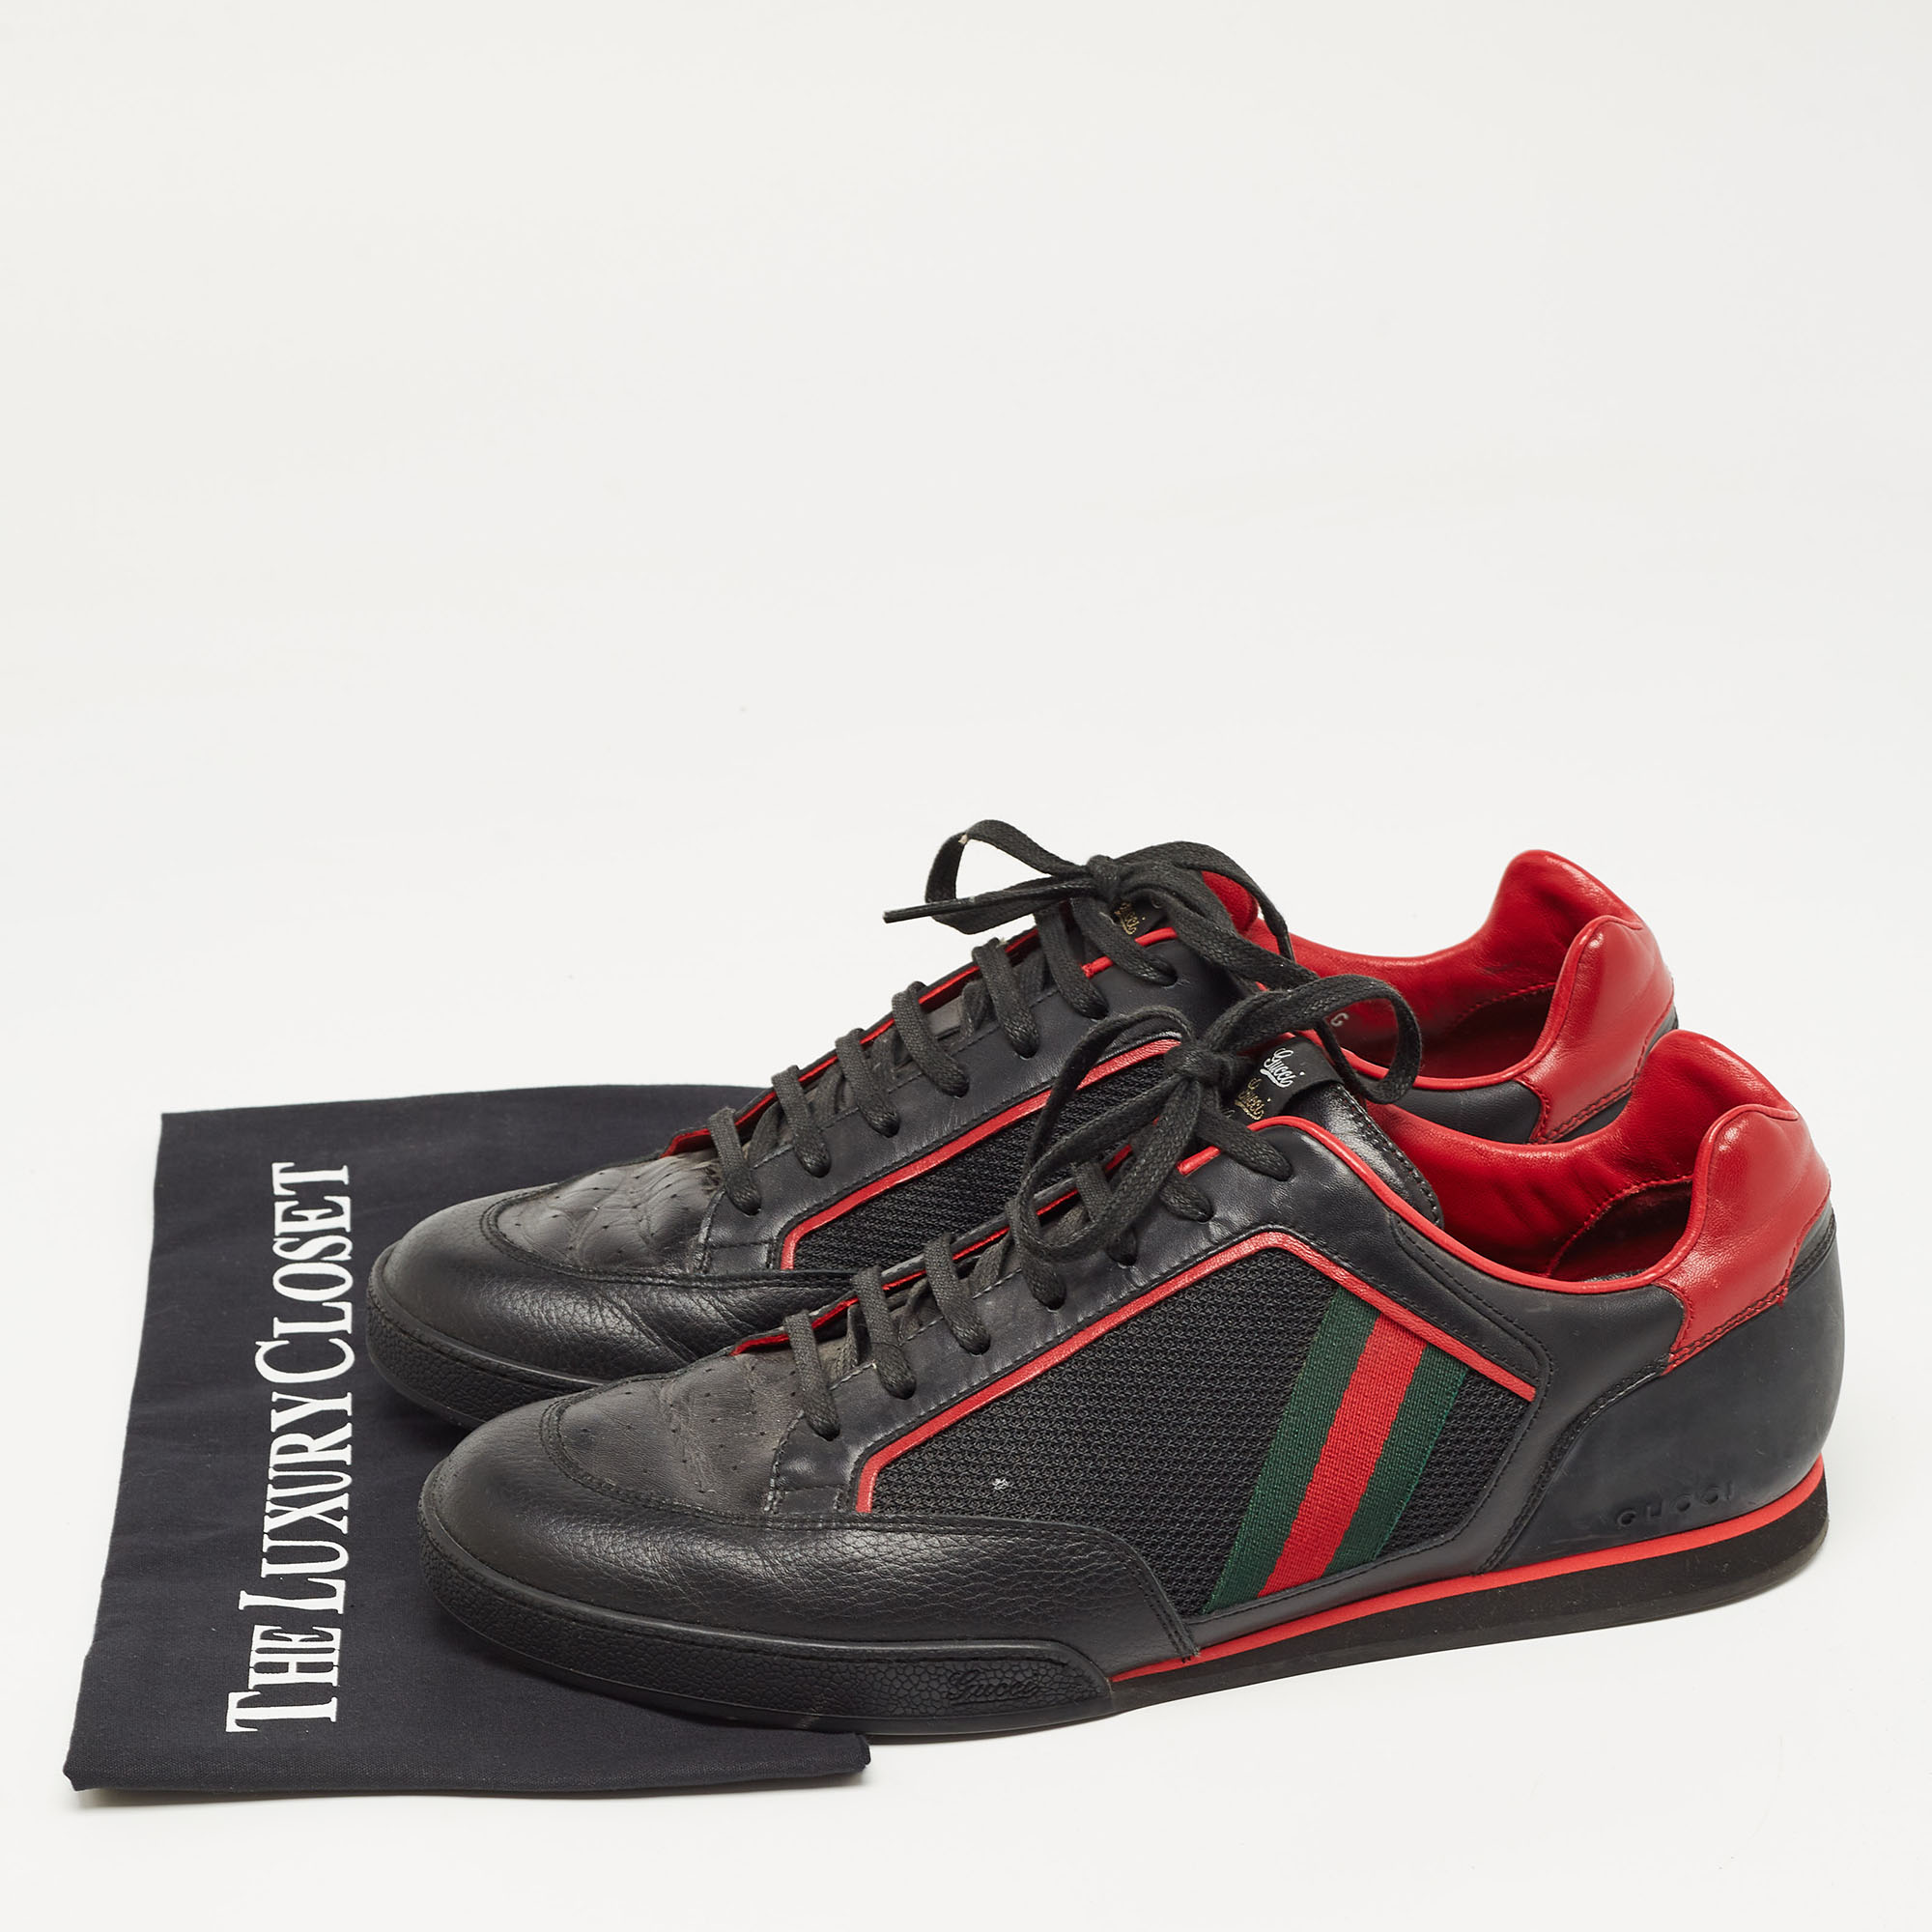 Gucci Black/Red Leather And Mesh Vintage Tennis Sneakers Size 43.5